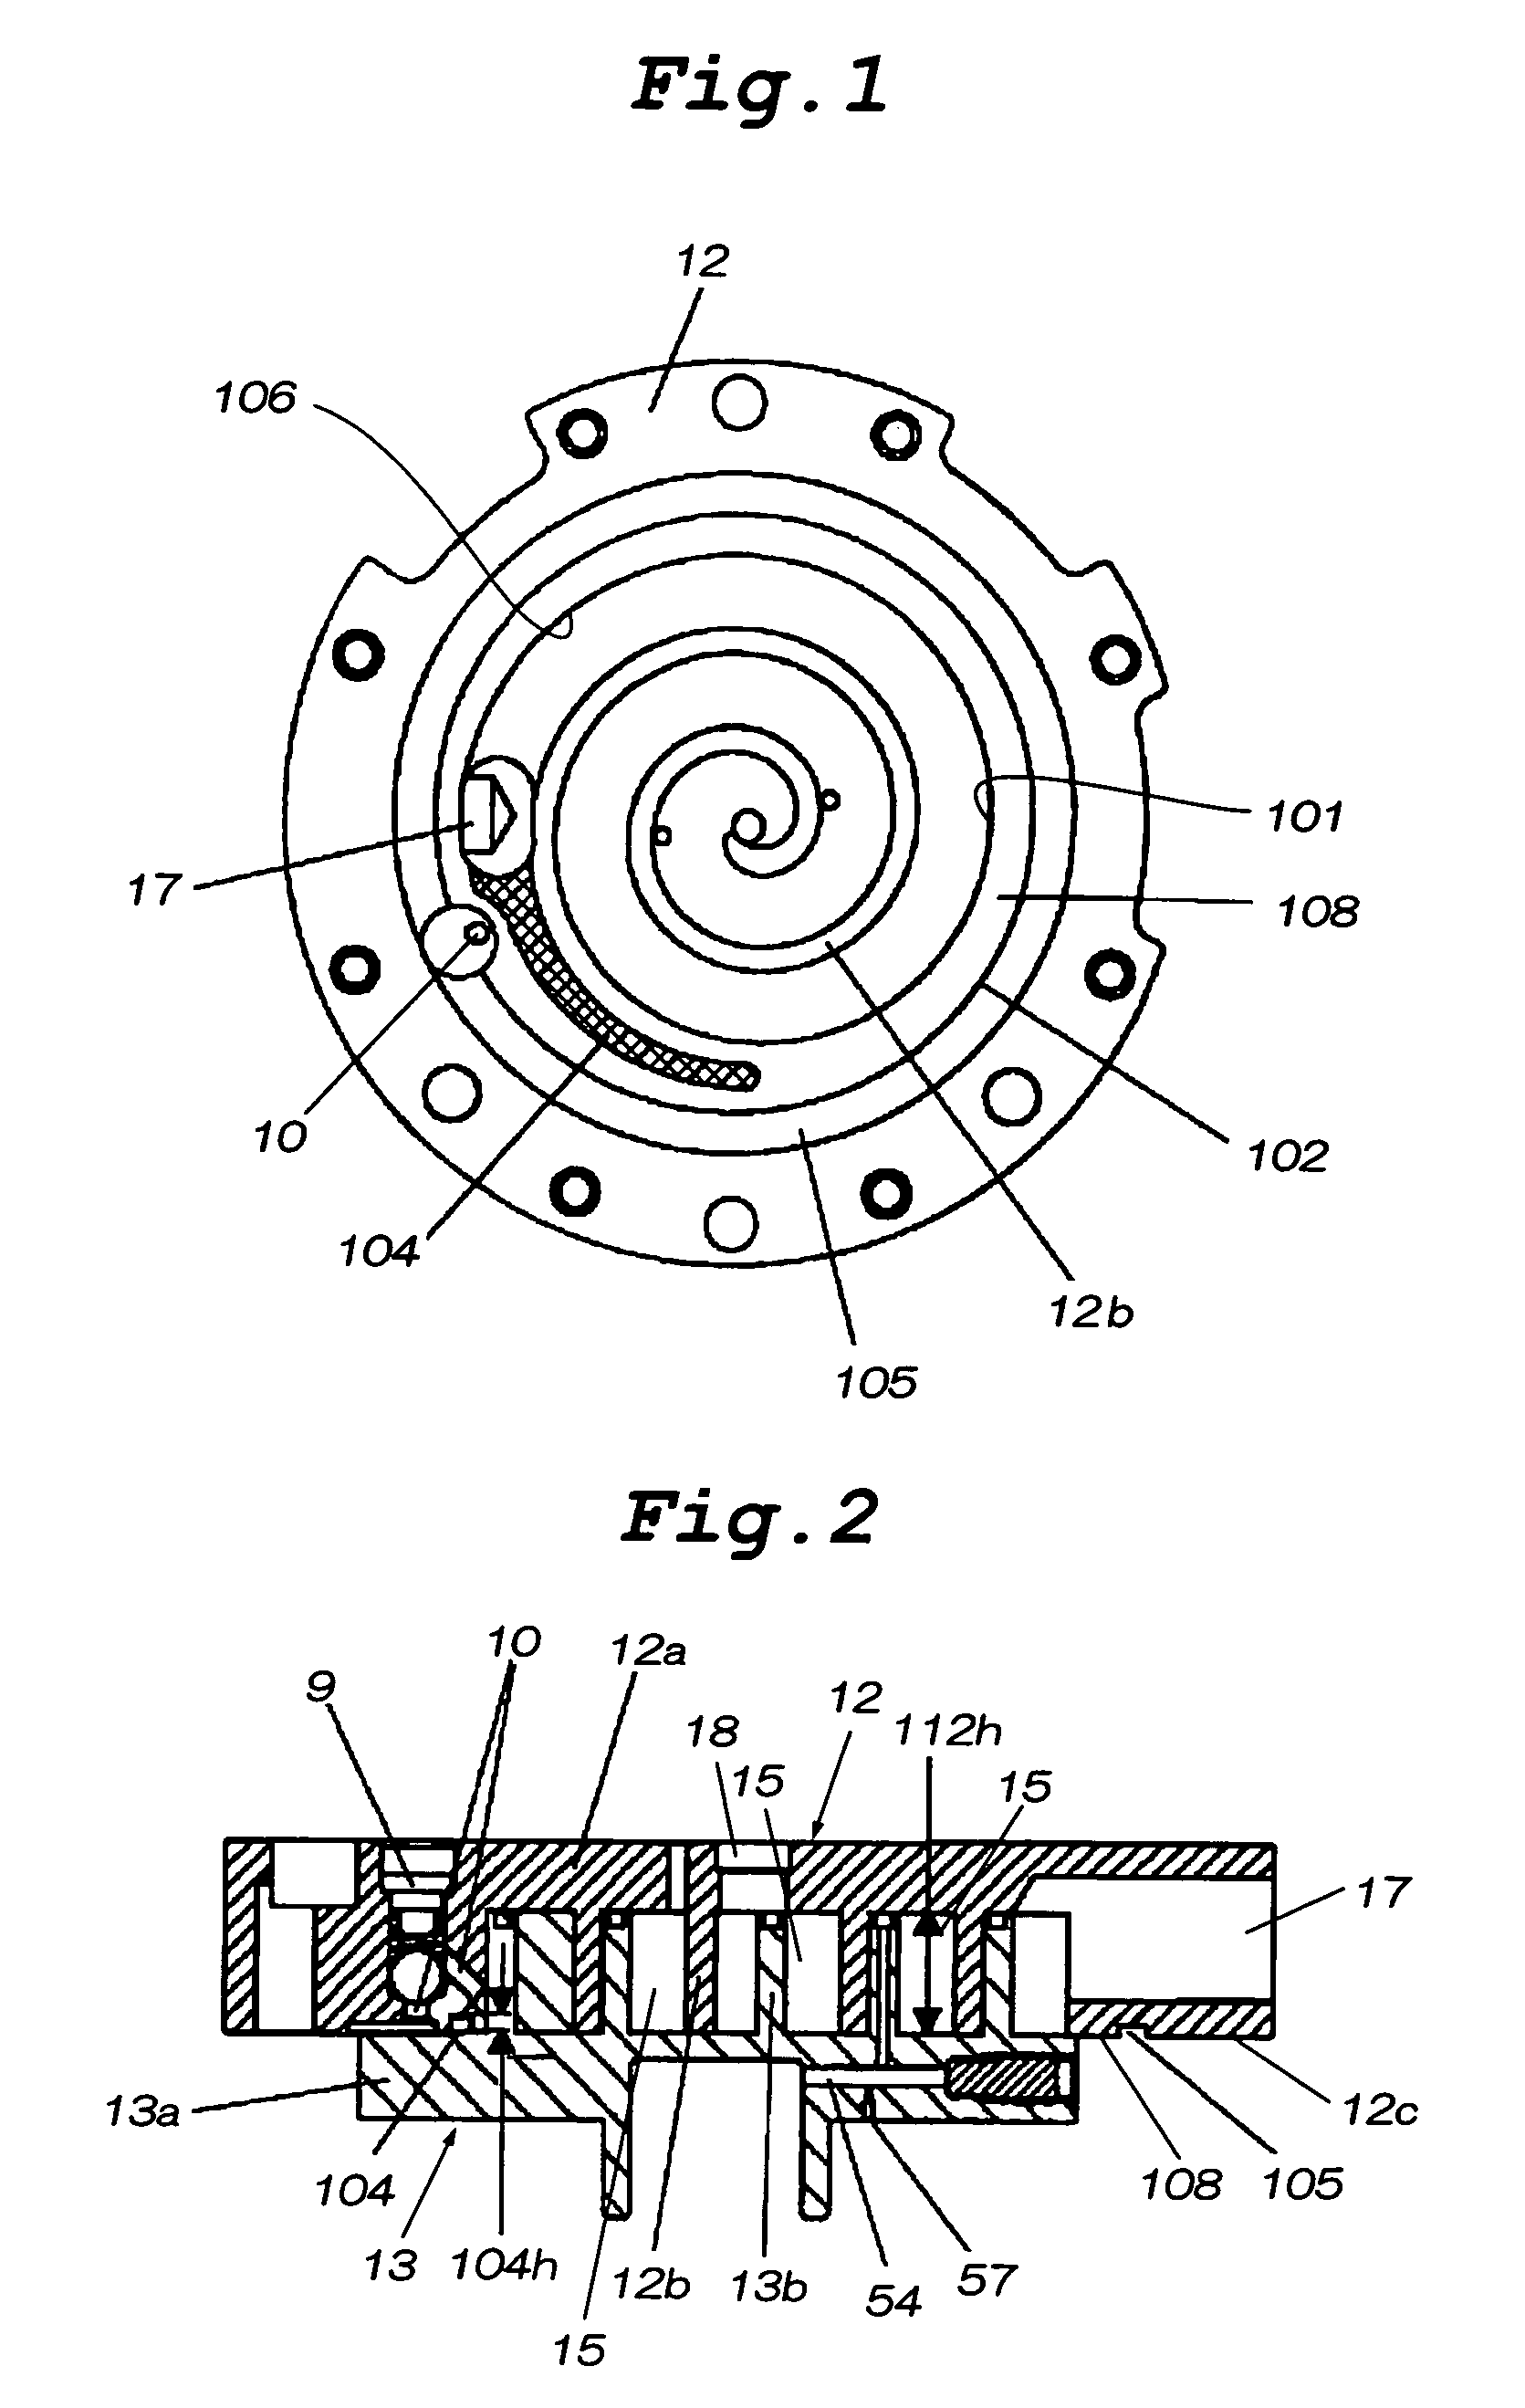 Scroll compressor having an annular recess located outside an annular seal portion and another recess communicating with suction port of fixed scroll